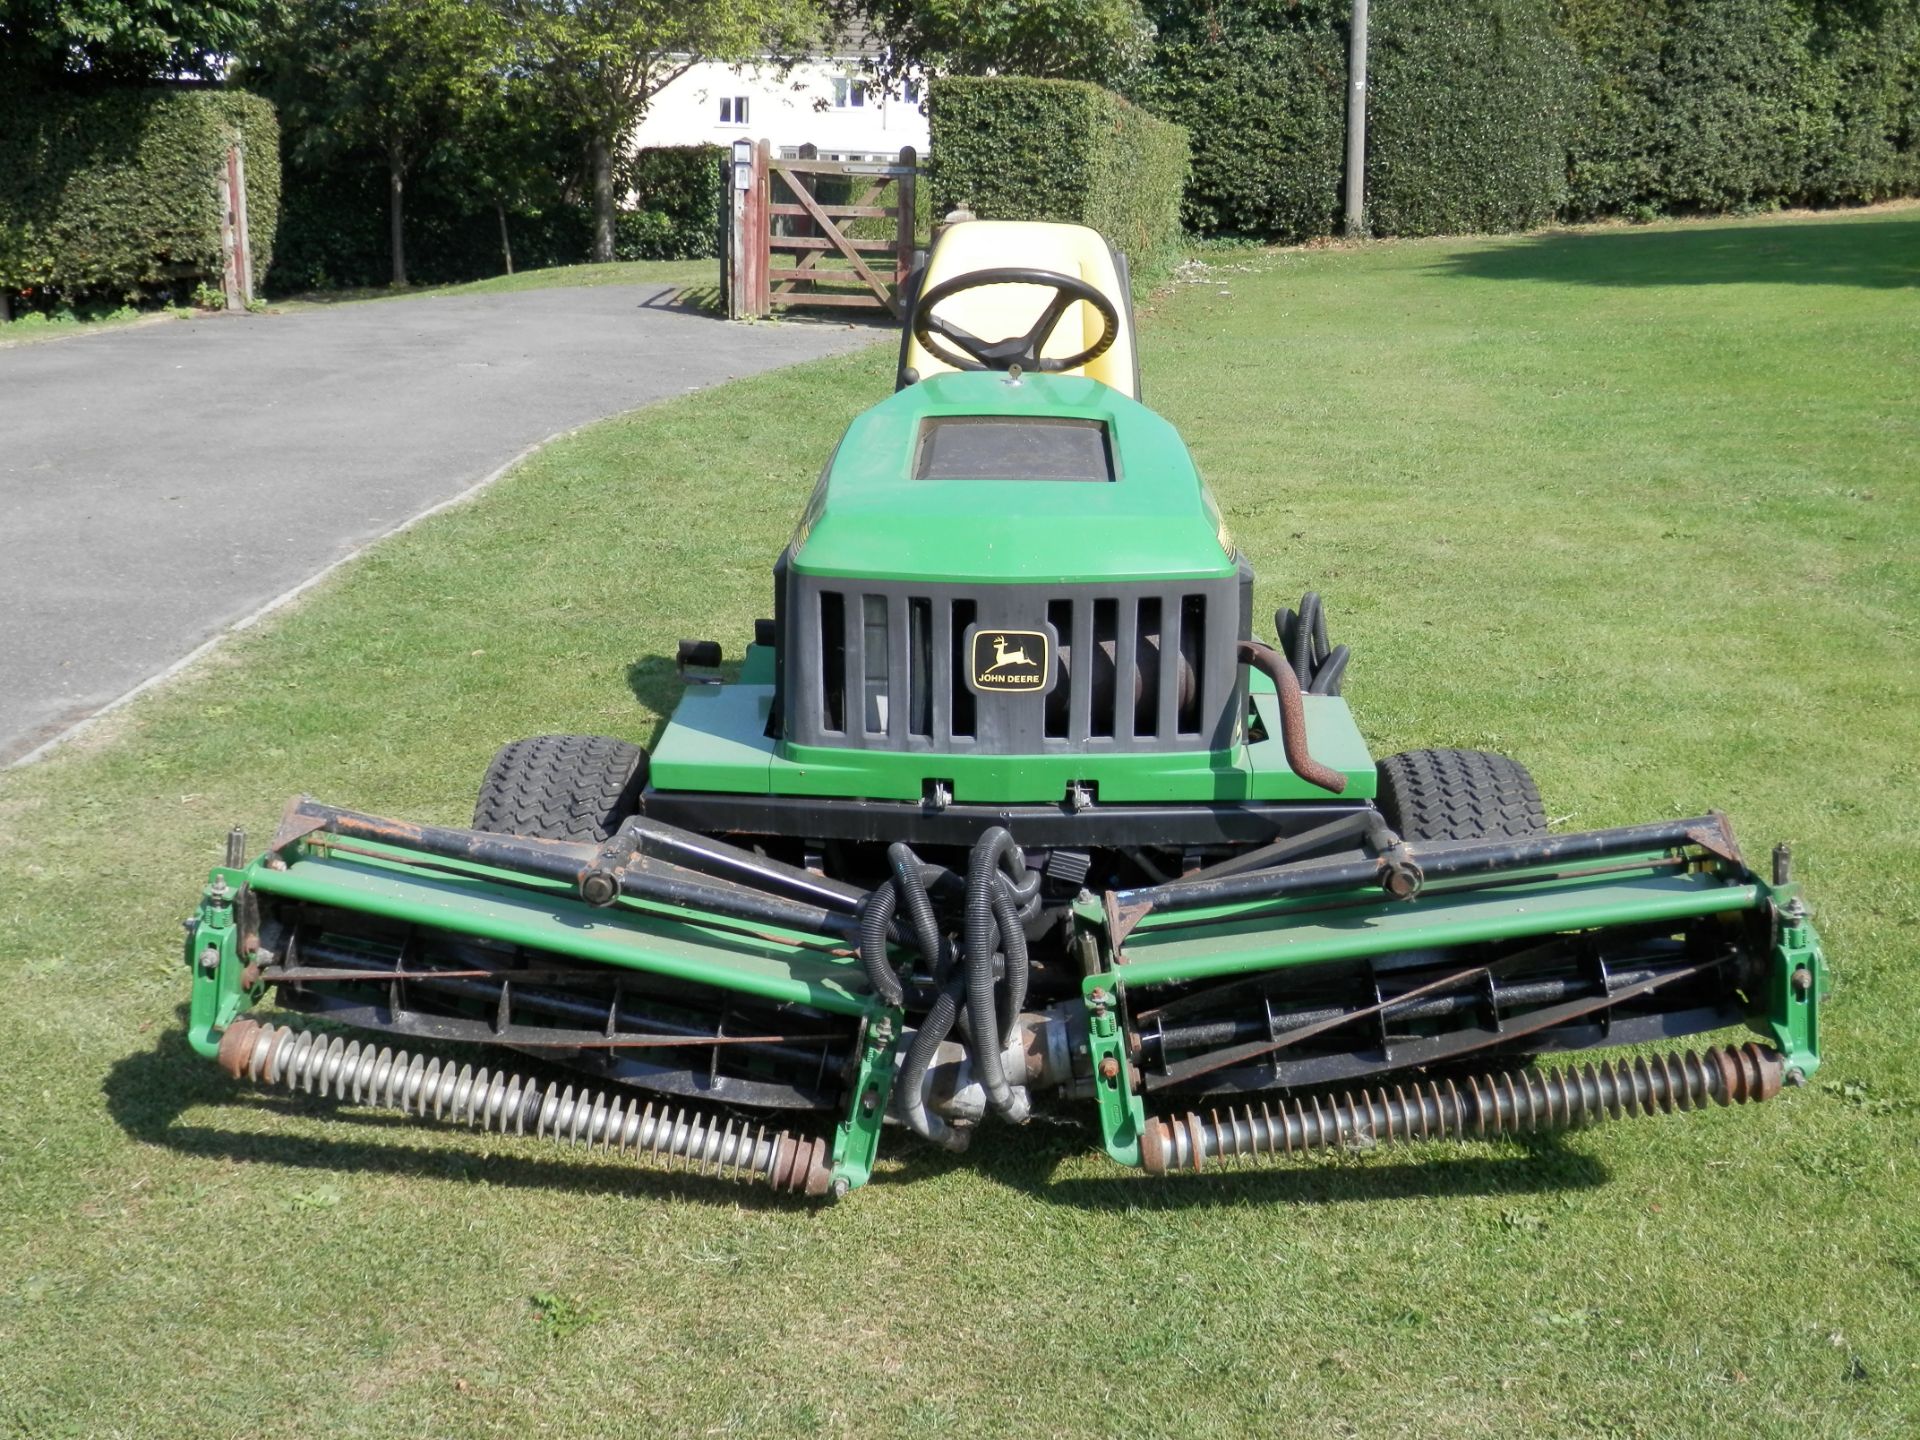 1996 JOHN DEERE 2653A RIDE ON GANG MOWER,CHECKED & WORKING. WIDE CUT, IDEAL FOR ESTATES/GOLF COURSES - Image 2 of 11